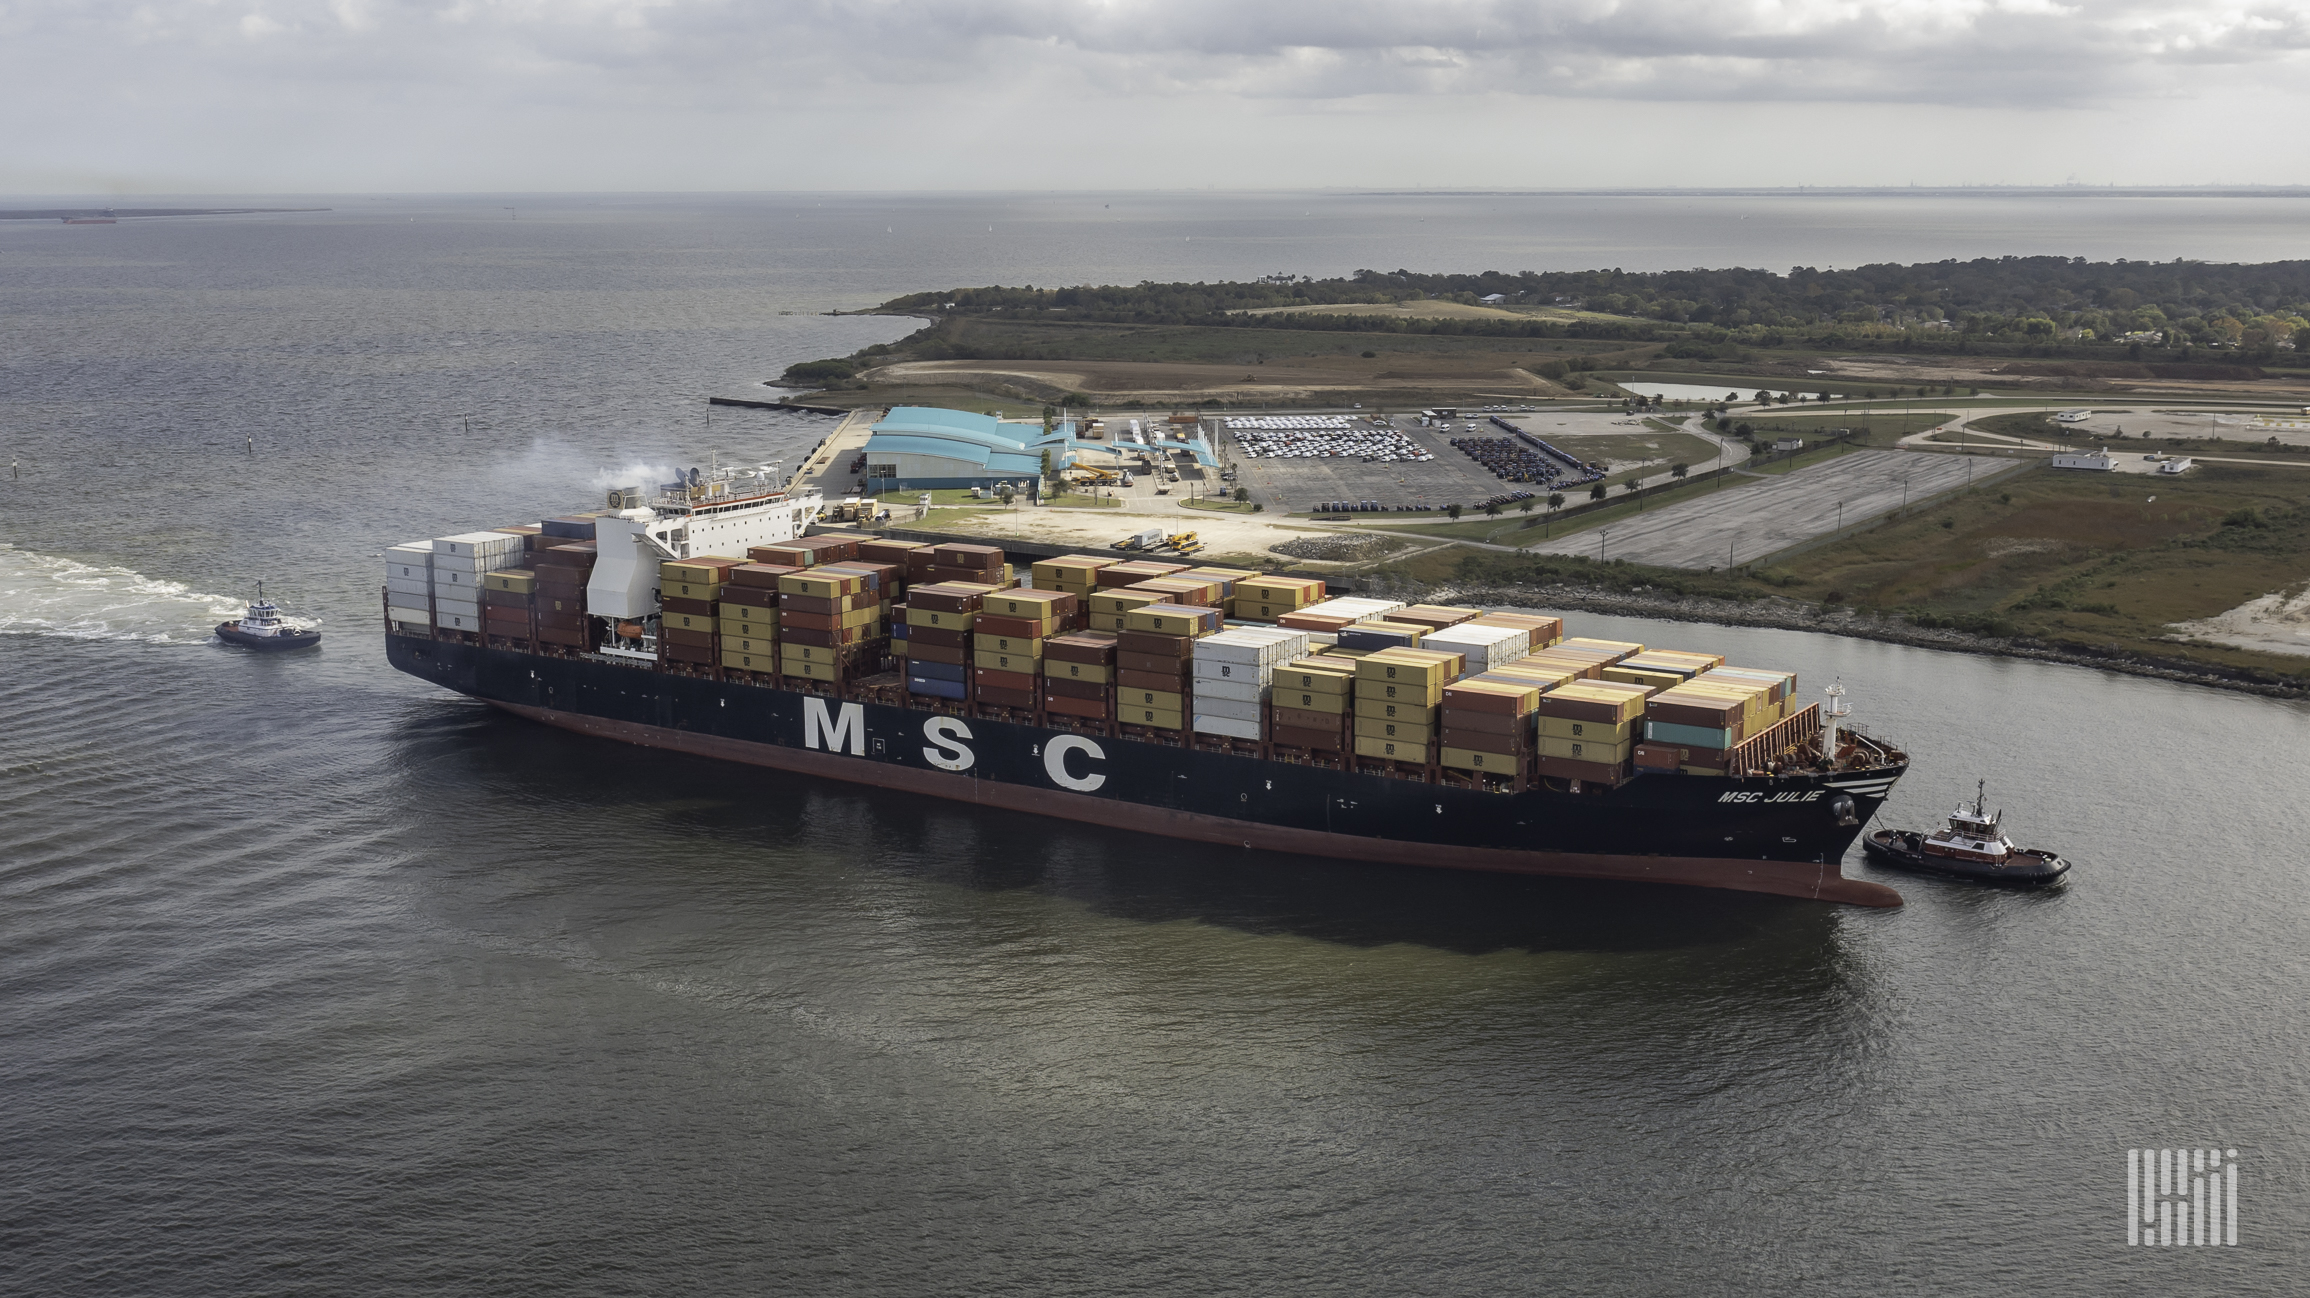 A massive container ship with MSC logo is pulled by tugs into the ship channel.